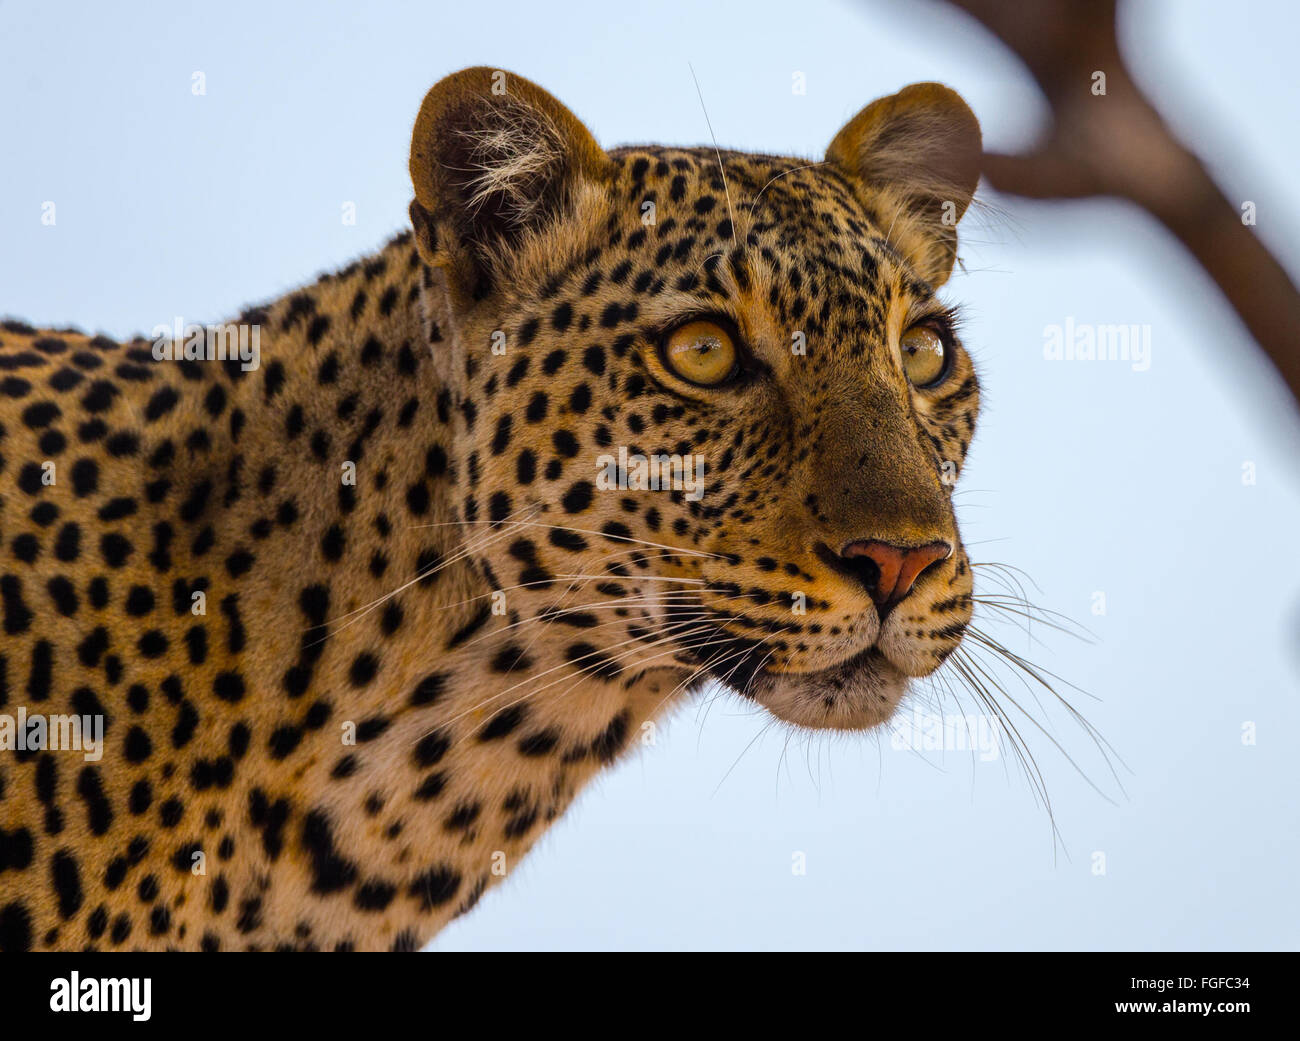 Leopard face and eyes watching prey from tree Stock Photo